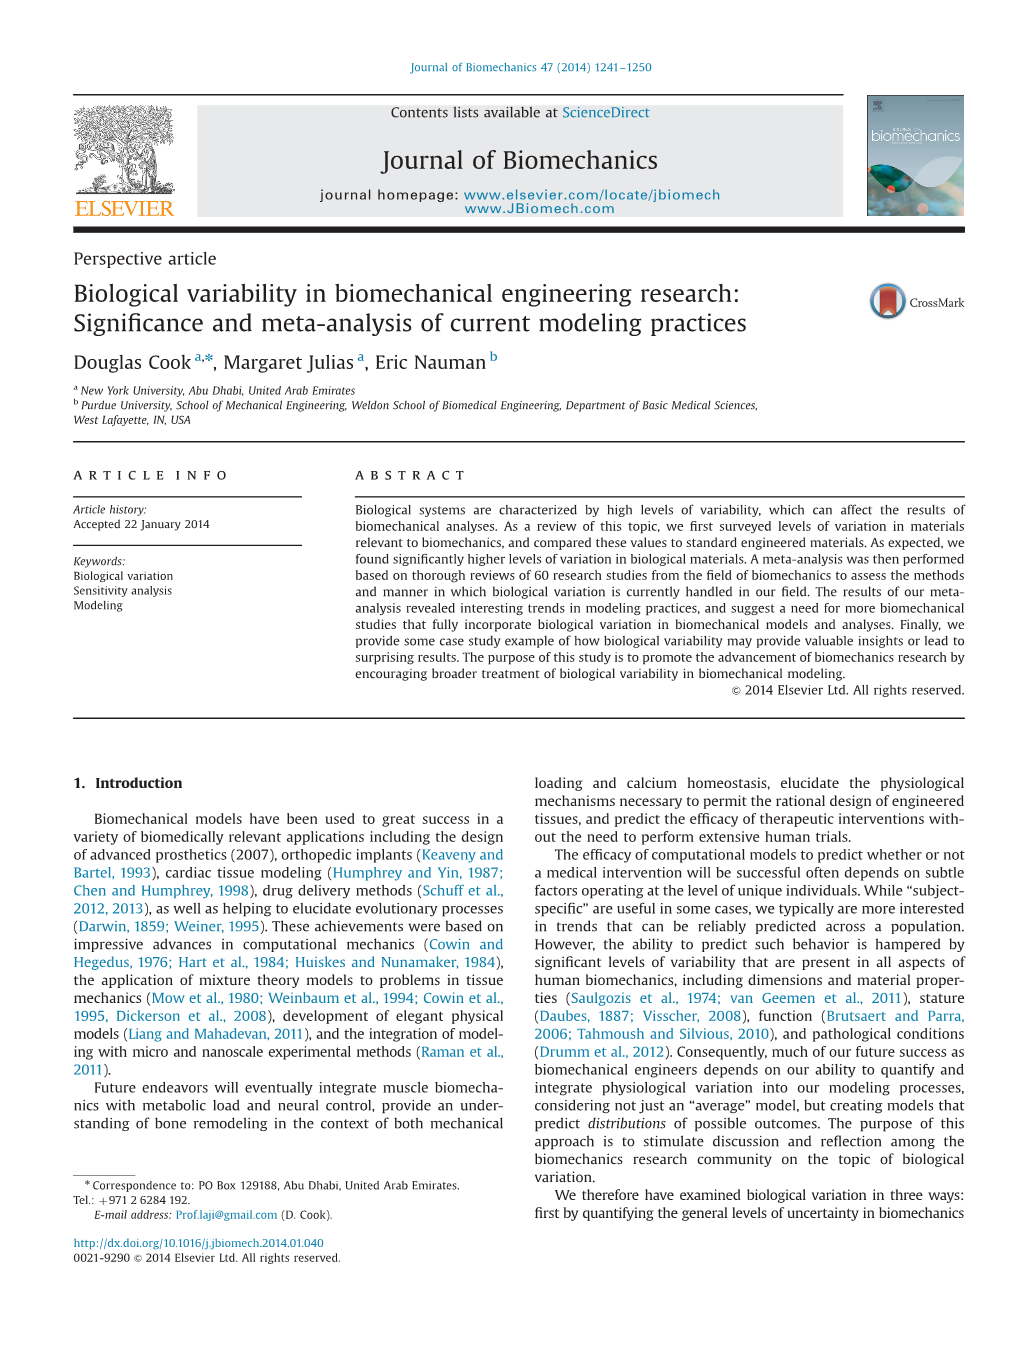 Biological Variability in Biomechanical Engineering Research Significance and Meta-Analysis of Current Modeling Practices